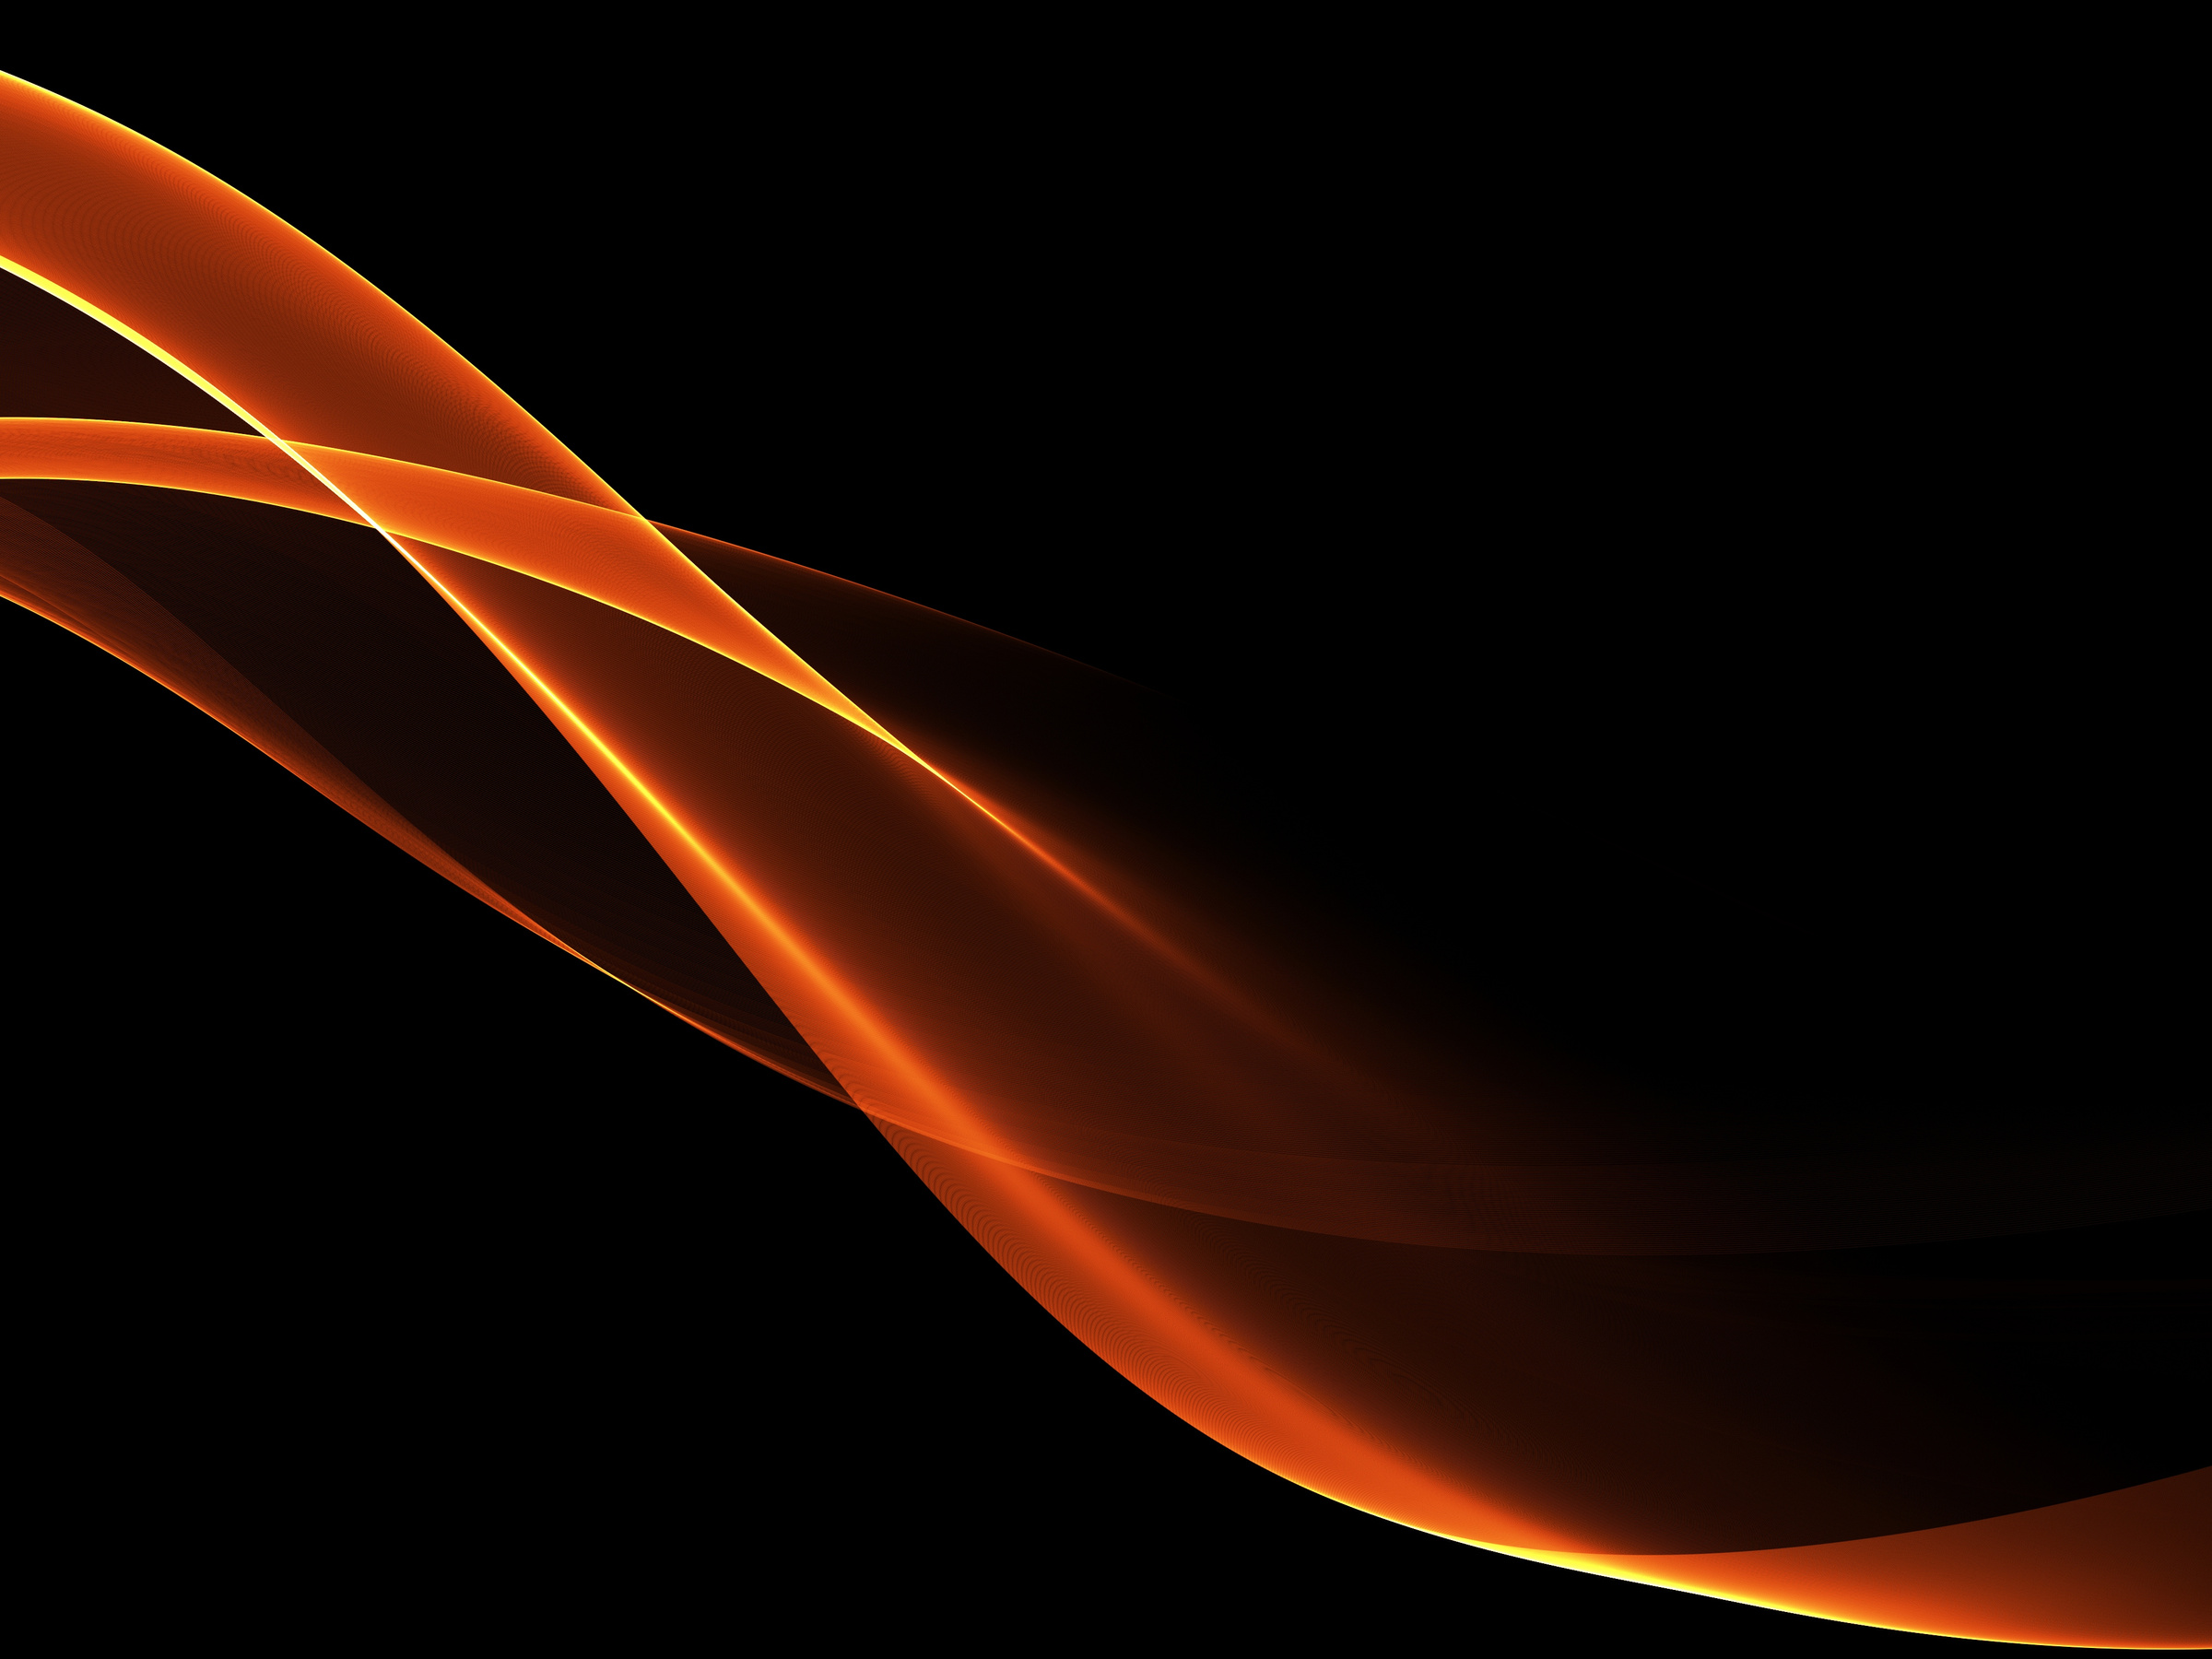 Abstract wave orange and black background